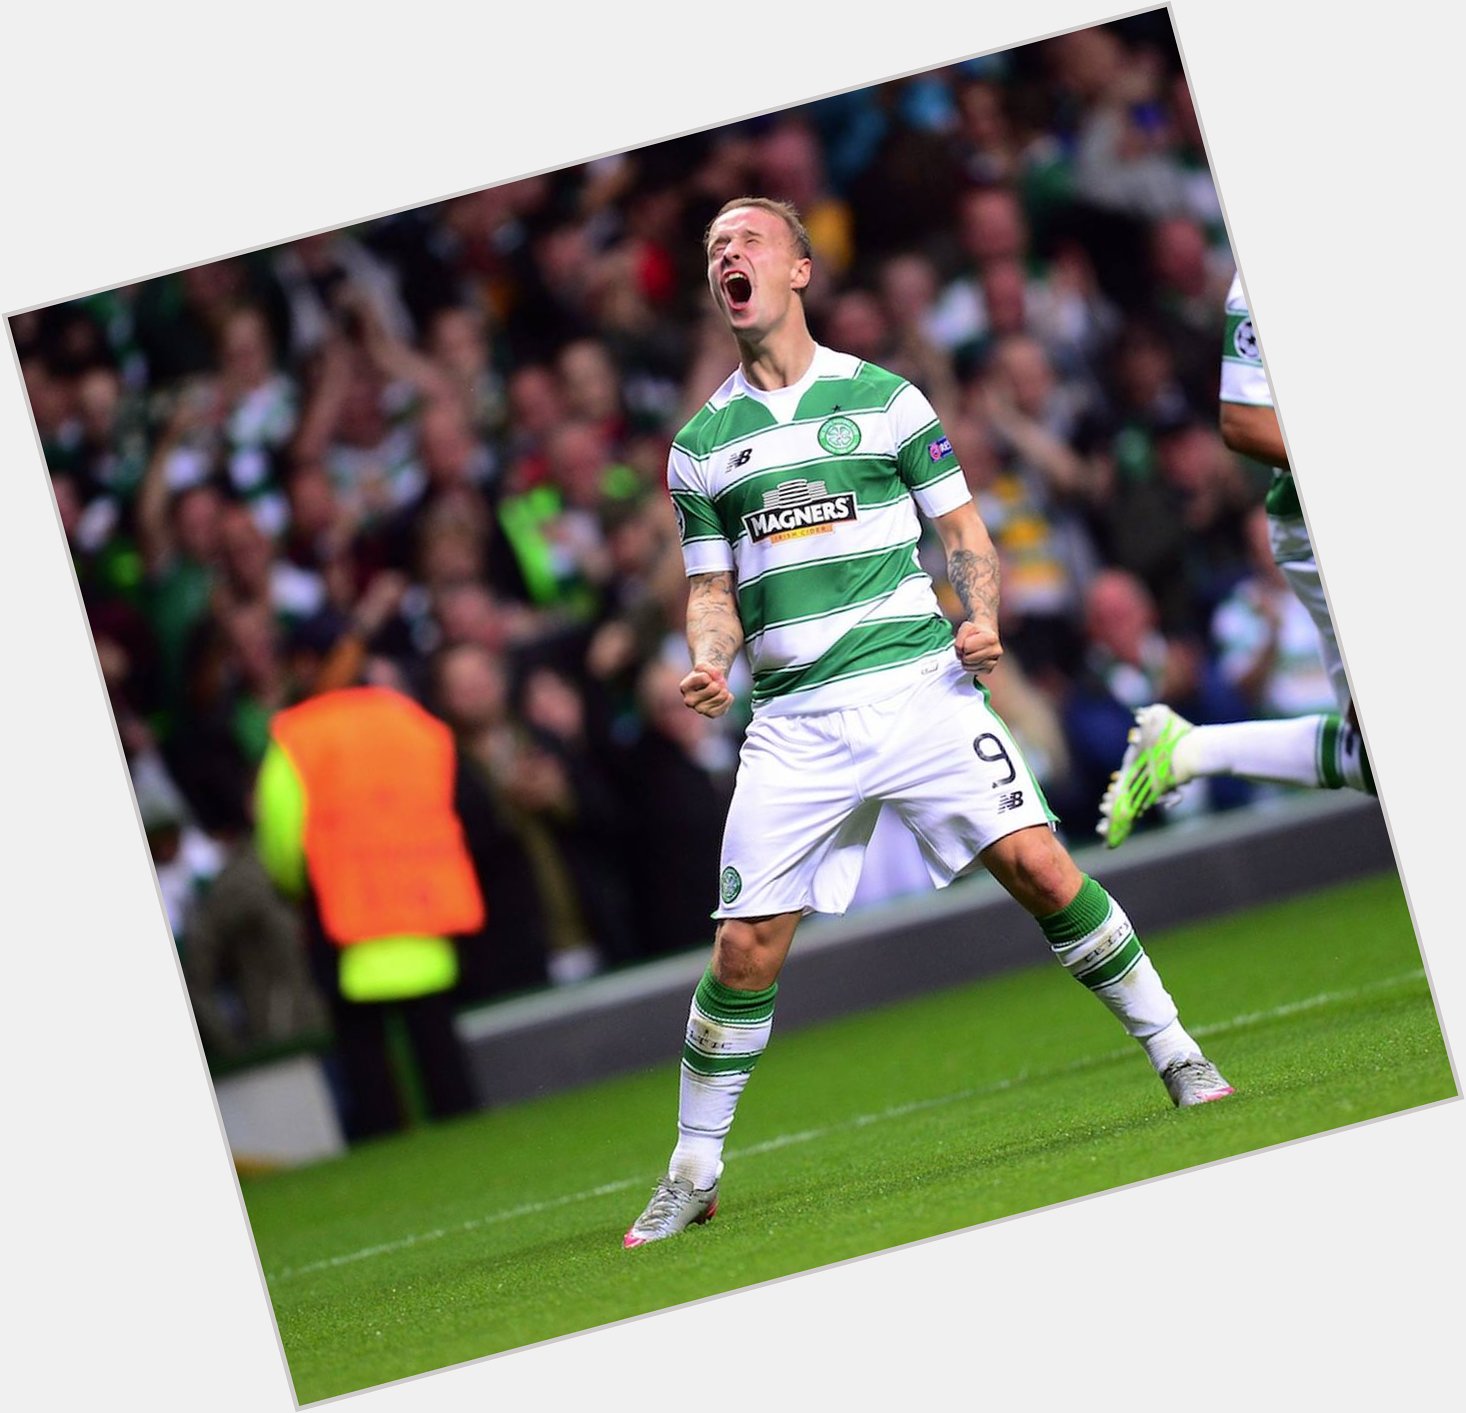 ON THIS DAY 20TH AUGUST 1990
Leigh Griffiths was born in  Leith Edinburgh
HAPPY BIRTHDAY GRIFF HH    